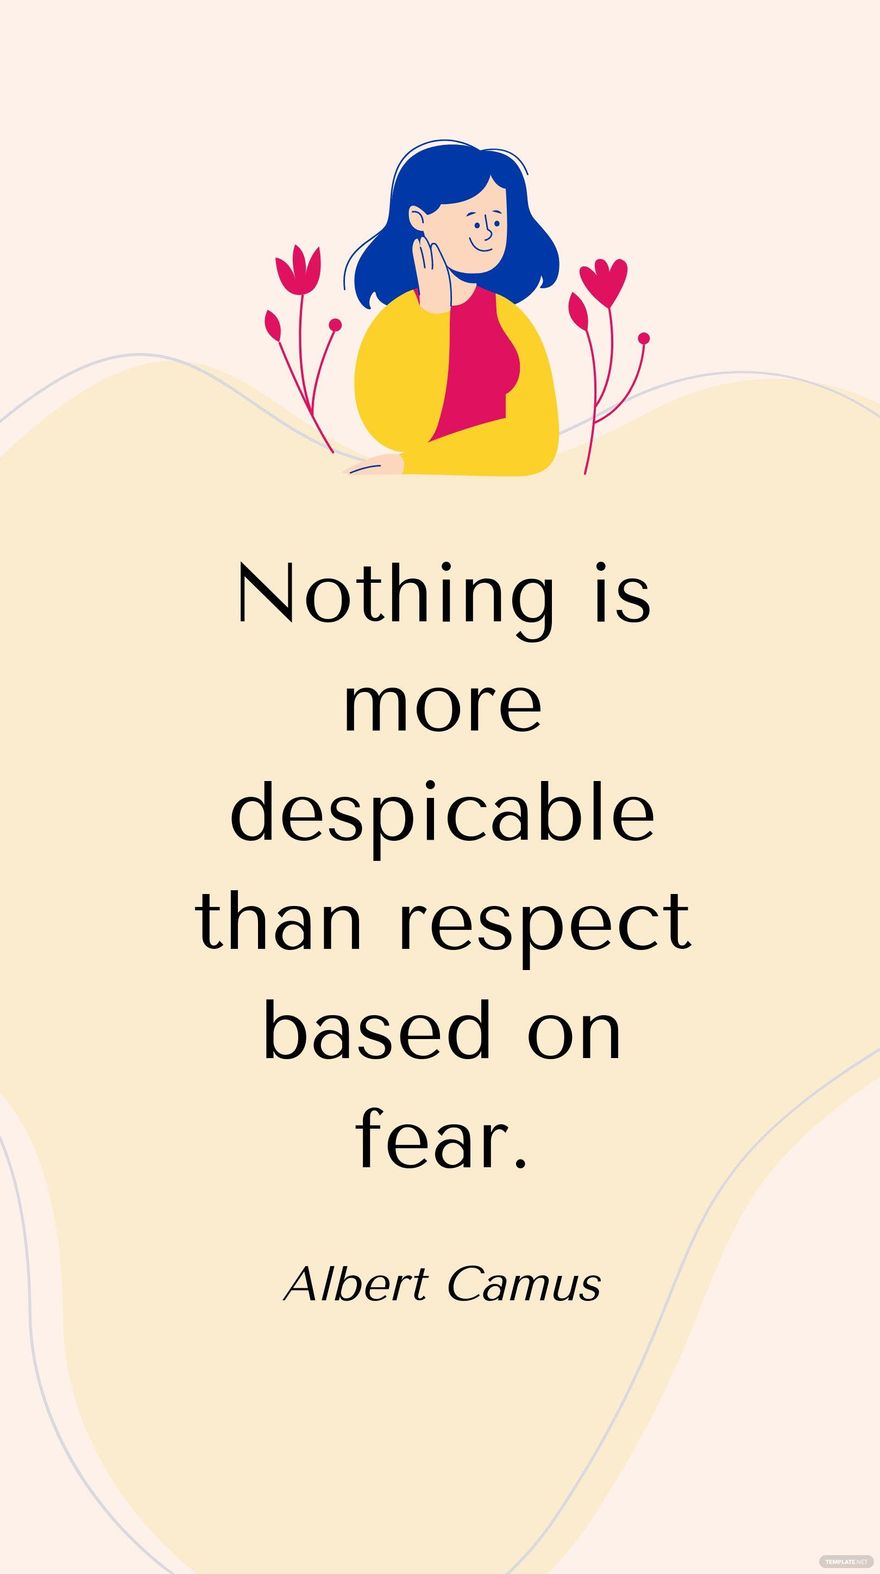 Albert Camus - Nothing is more despicable than respect based on fear. in JPG